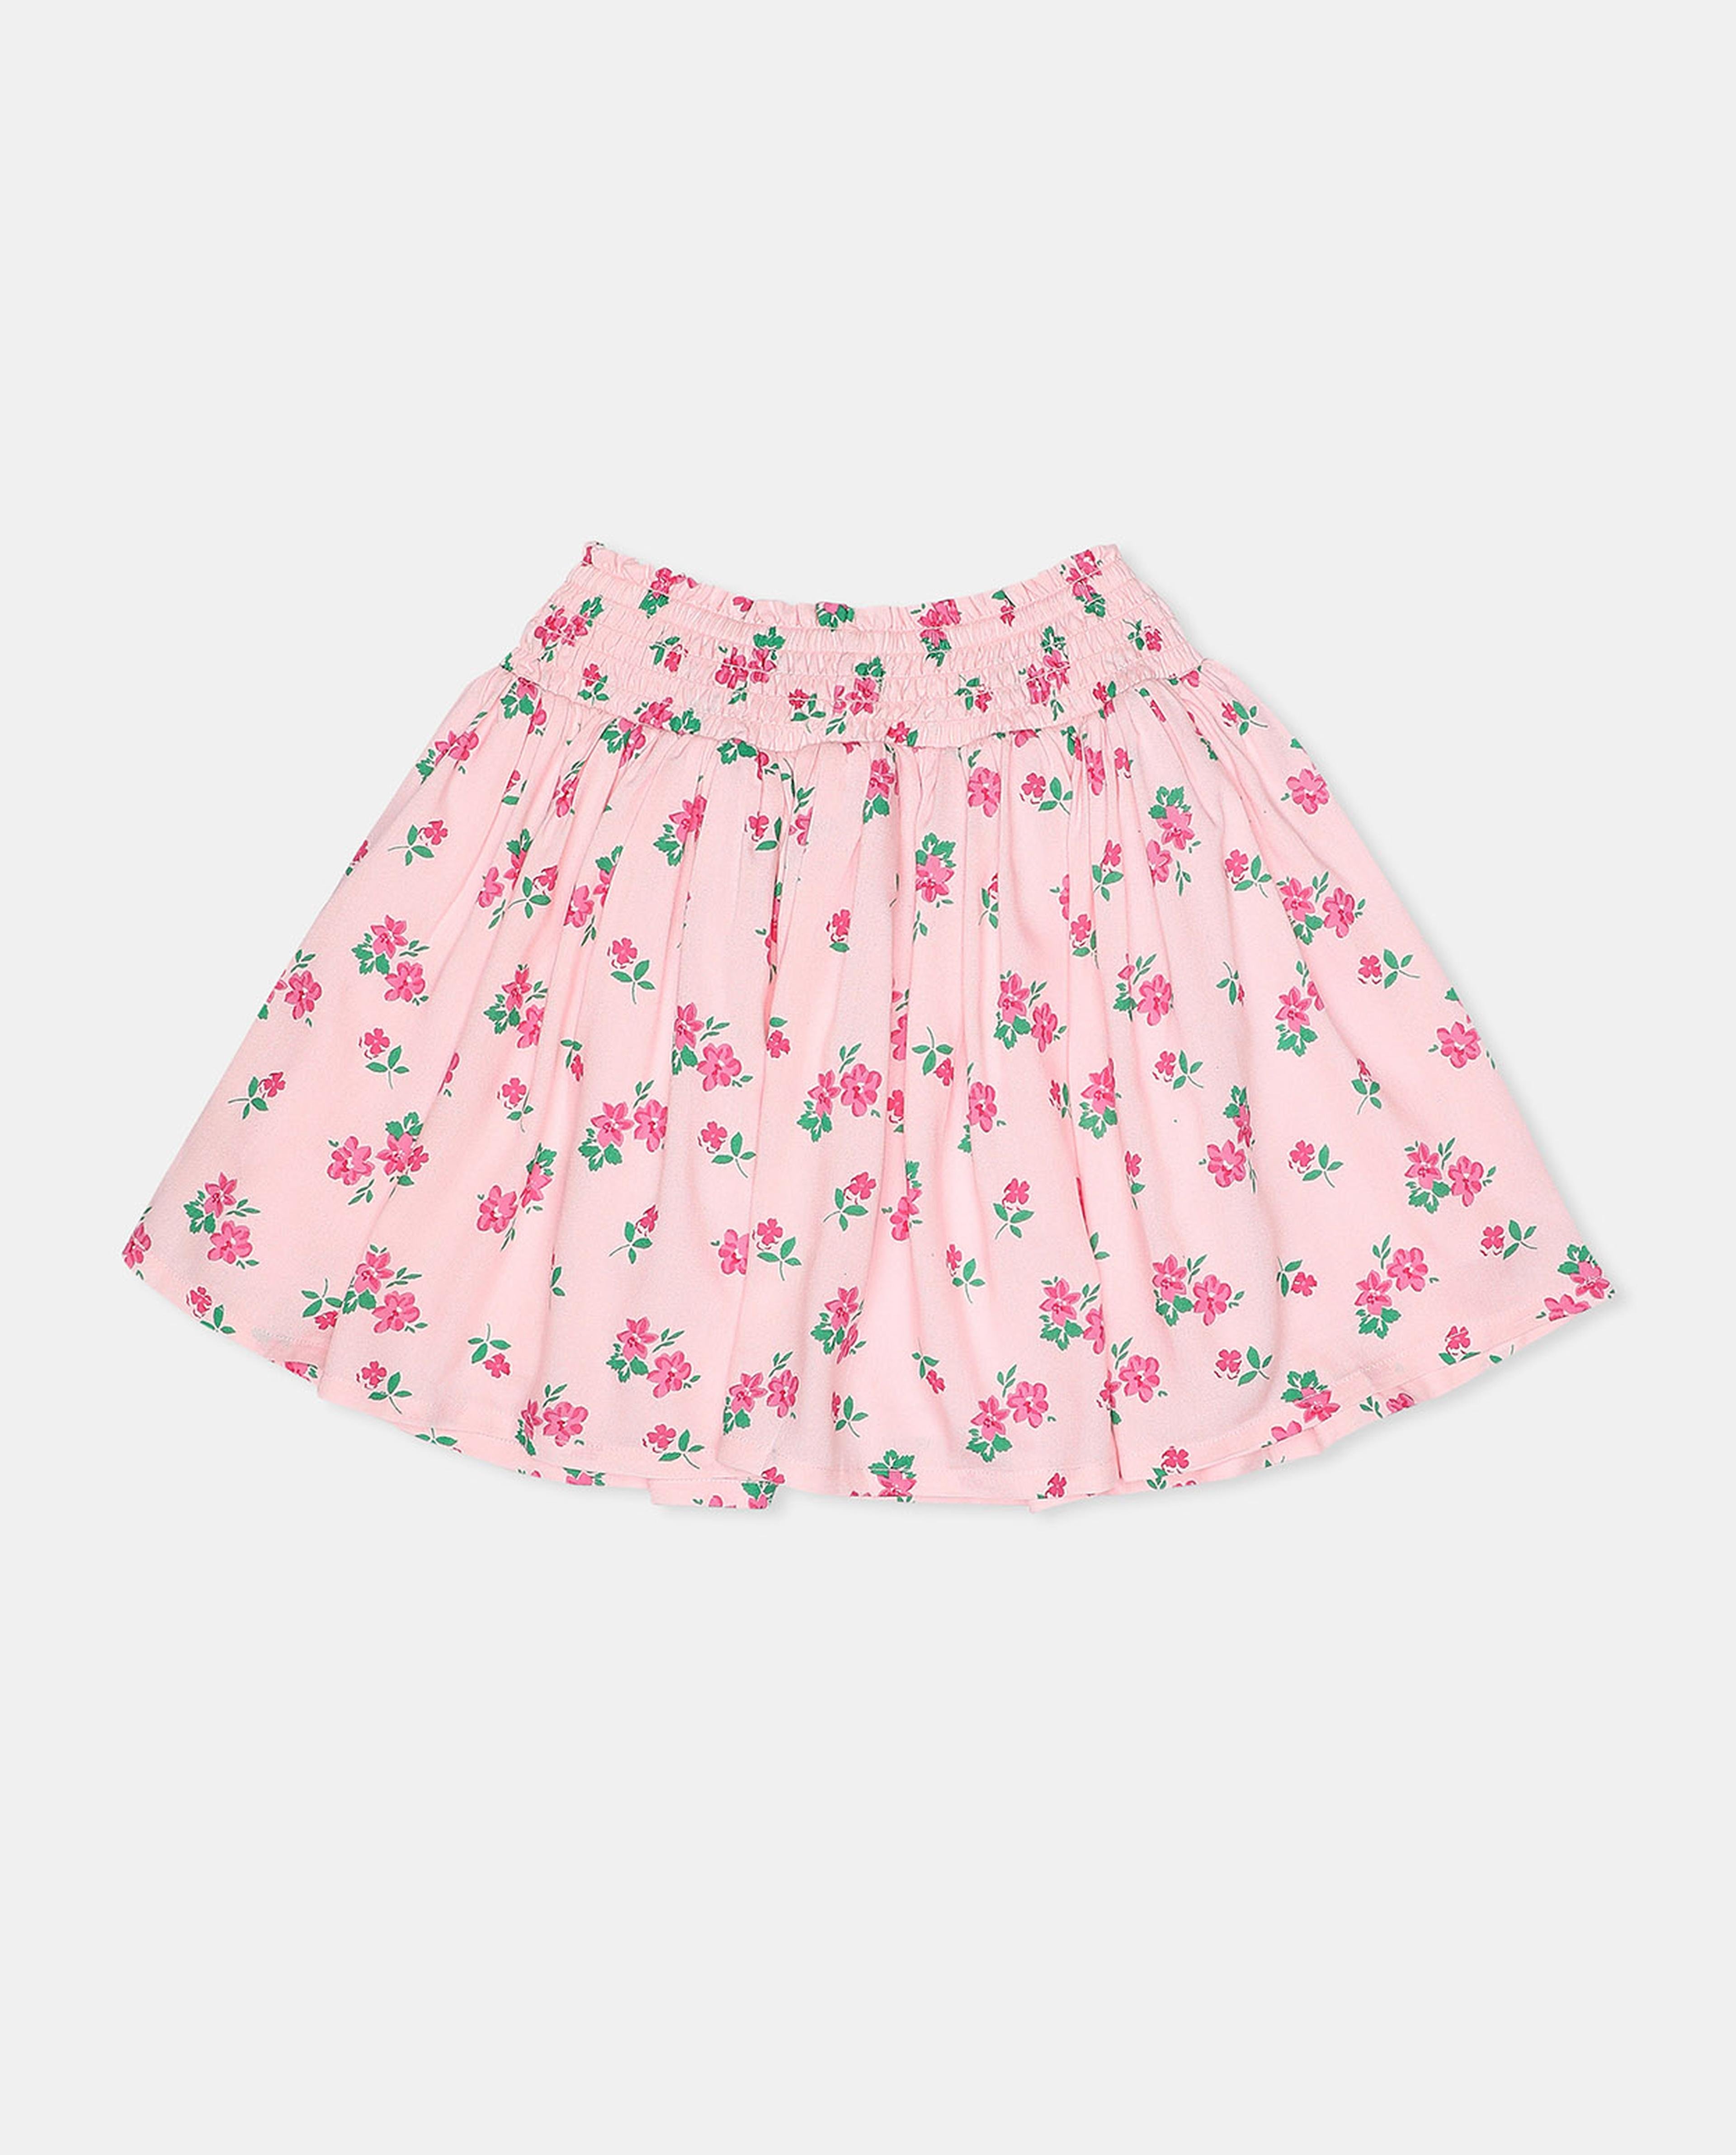 Floral Printed Skirt with Slip-On Closure